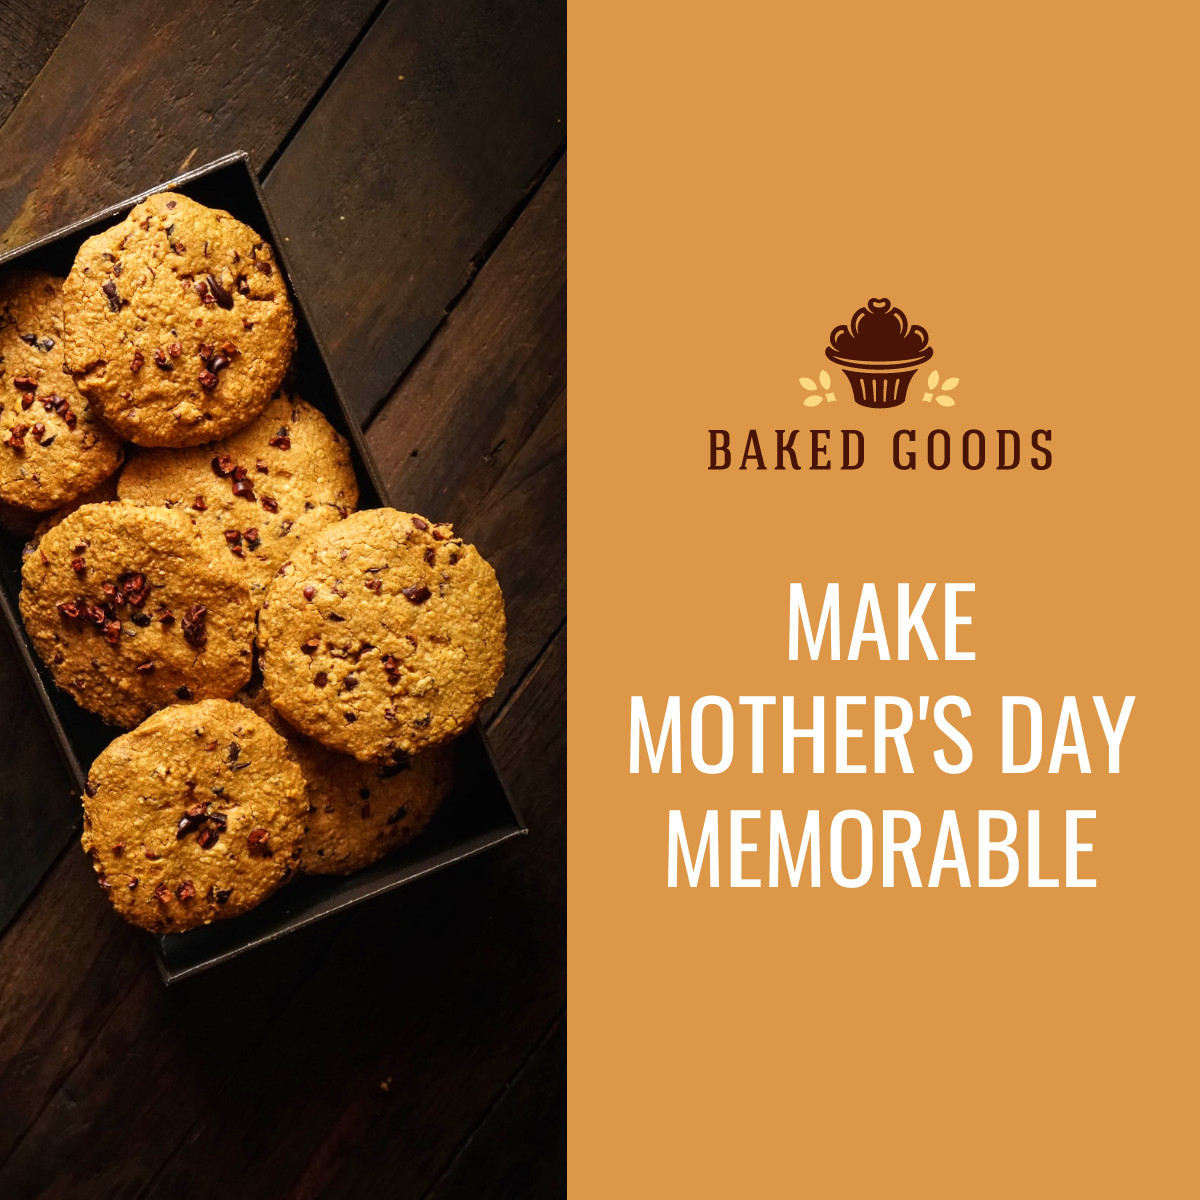 Make Mother's Day Memorable Bakery